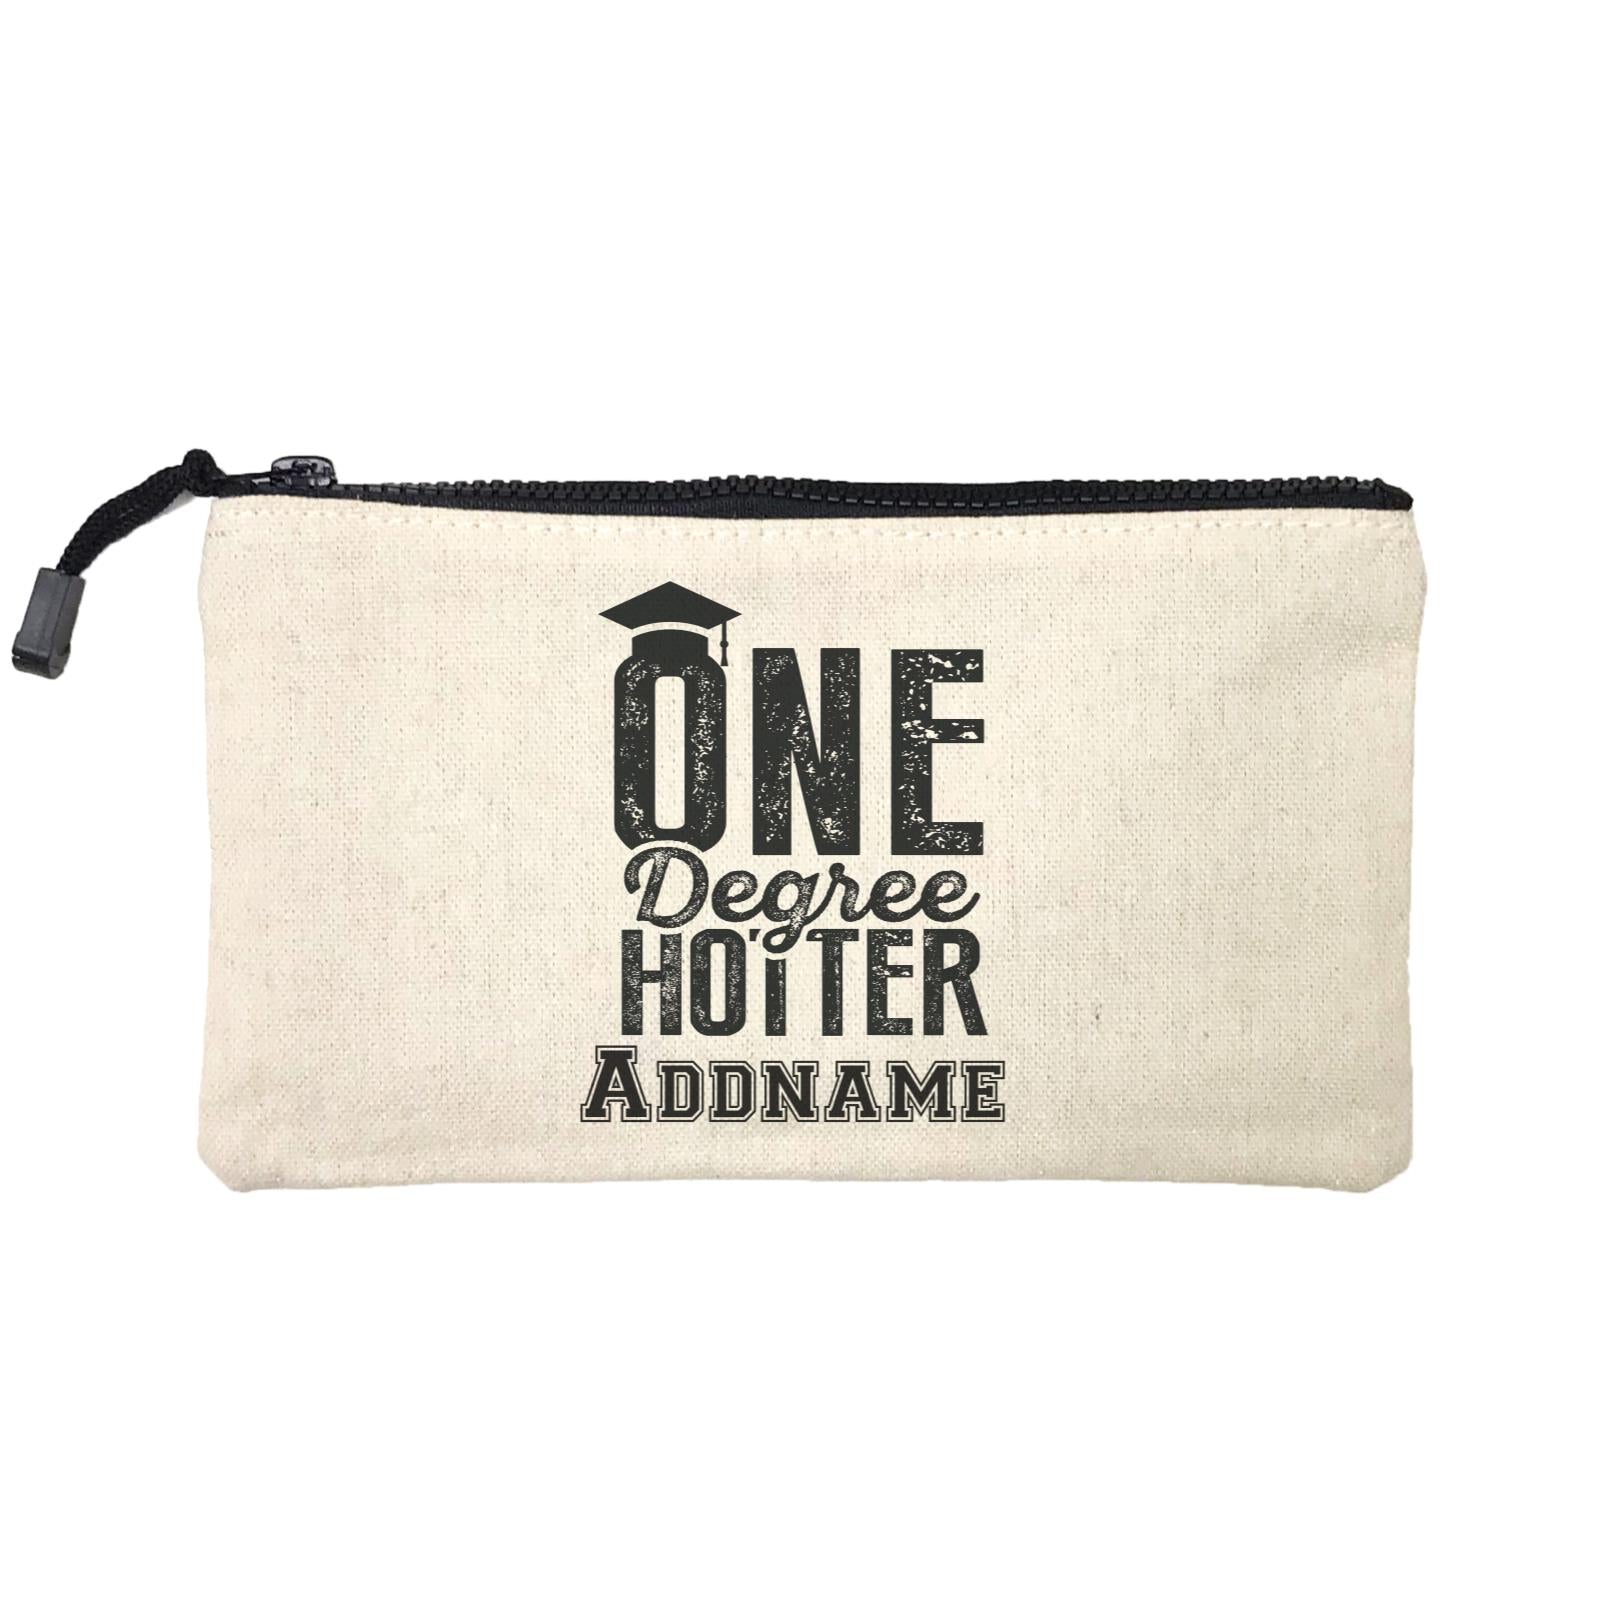 Graduation Series One Degree Hotter Mini Accessories Stationery Pouch